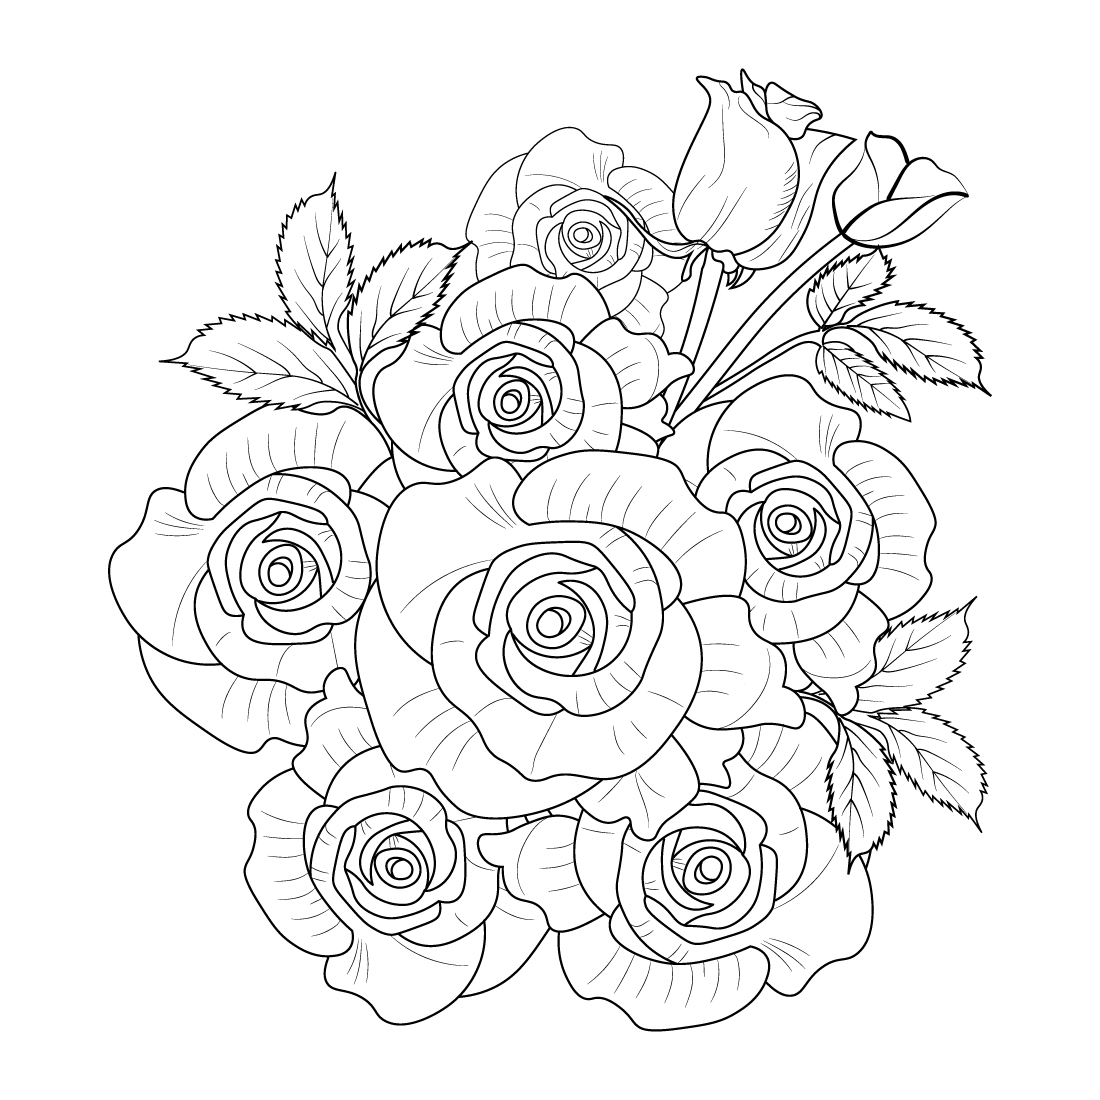 rose flower bouquet drawing outline, rose drawing, rose drawing the outline, stencil rose drawing the outline, outline stencil rose tattoo drawing, realistic rose outline stencil rose tattoo, rose flower bouquet illustration, rose botanical illustration preview image.